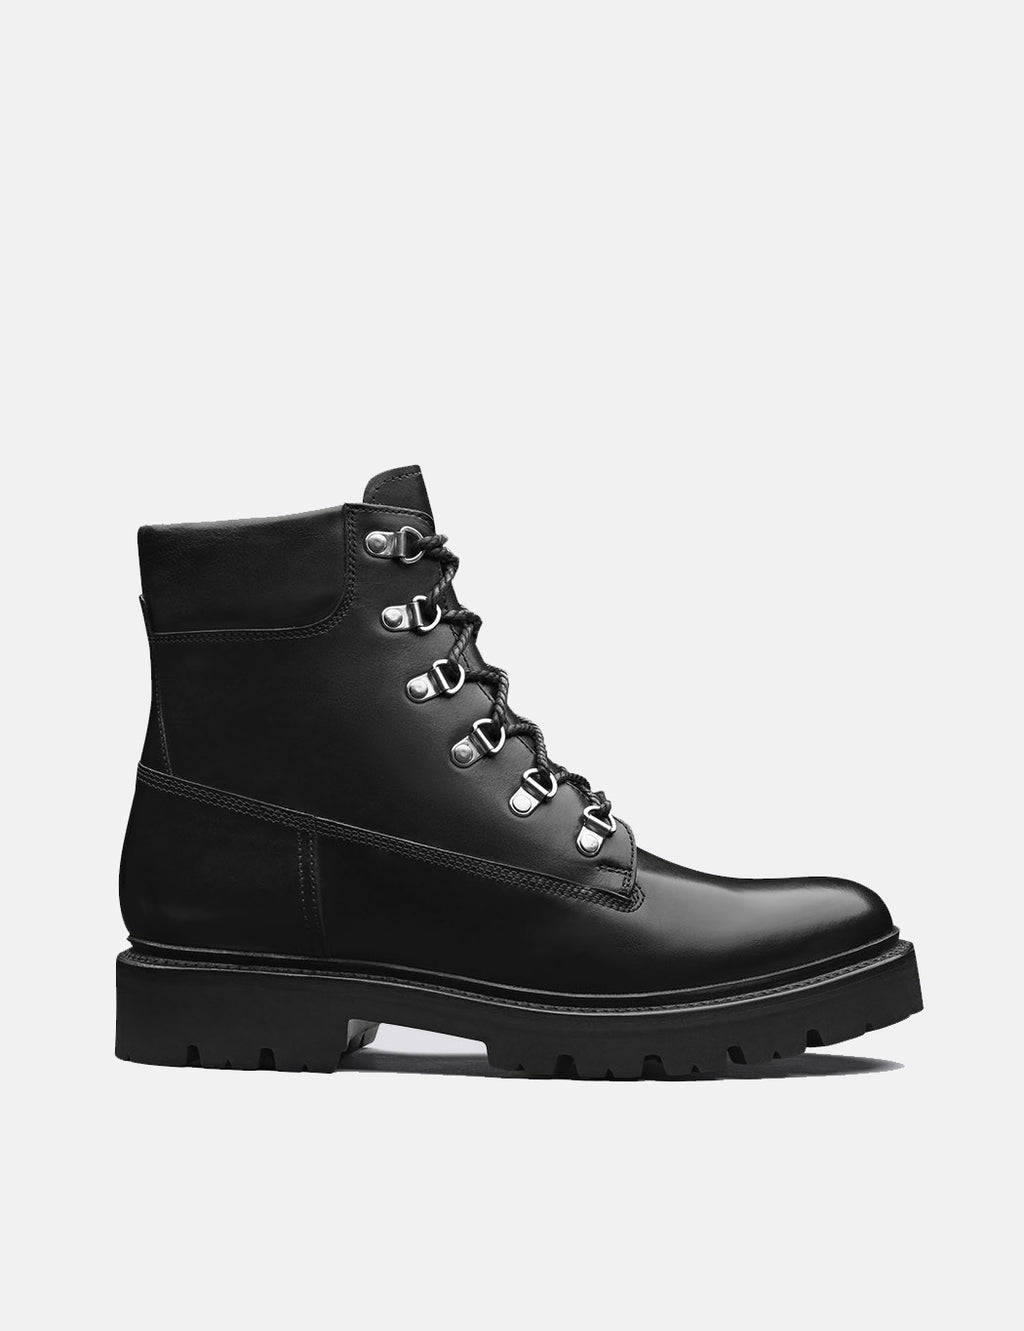 Grenson Rutherford Boot (Hand Painted) - Black | URBANEXCESS. – URBAN ...